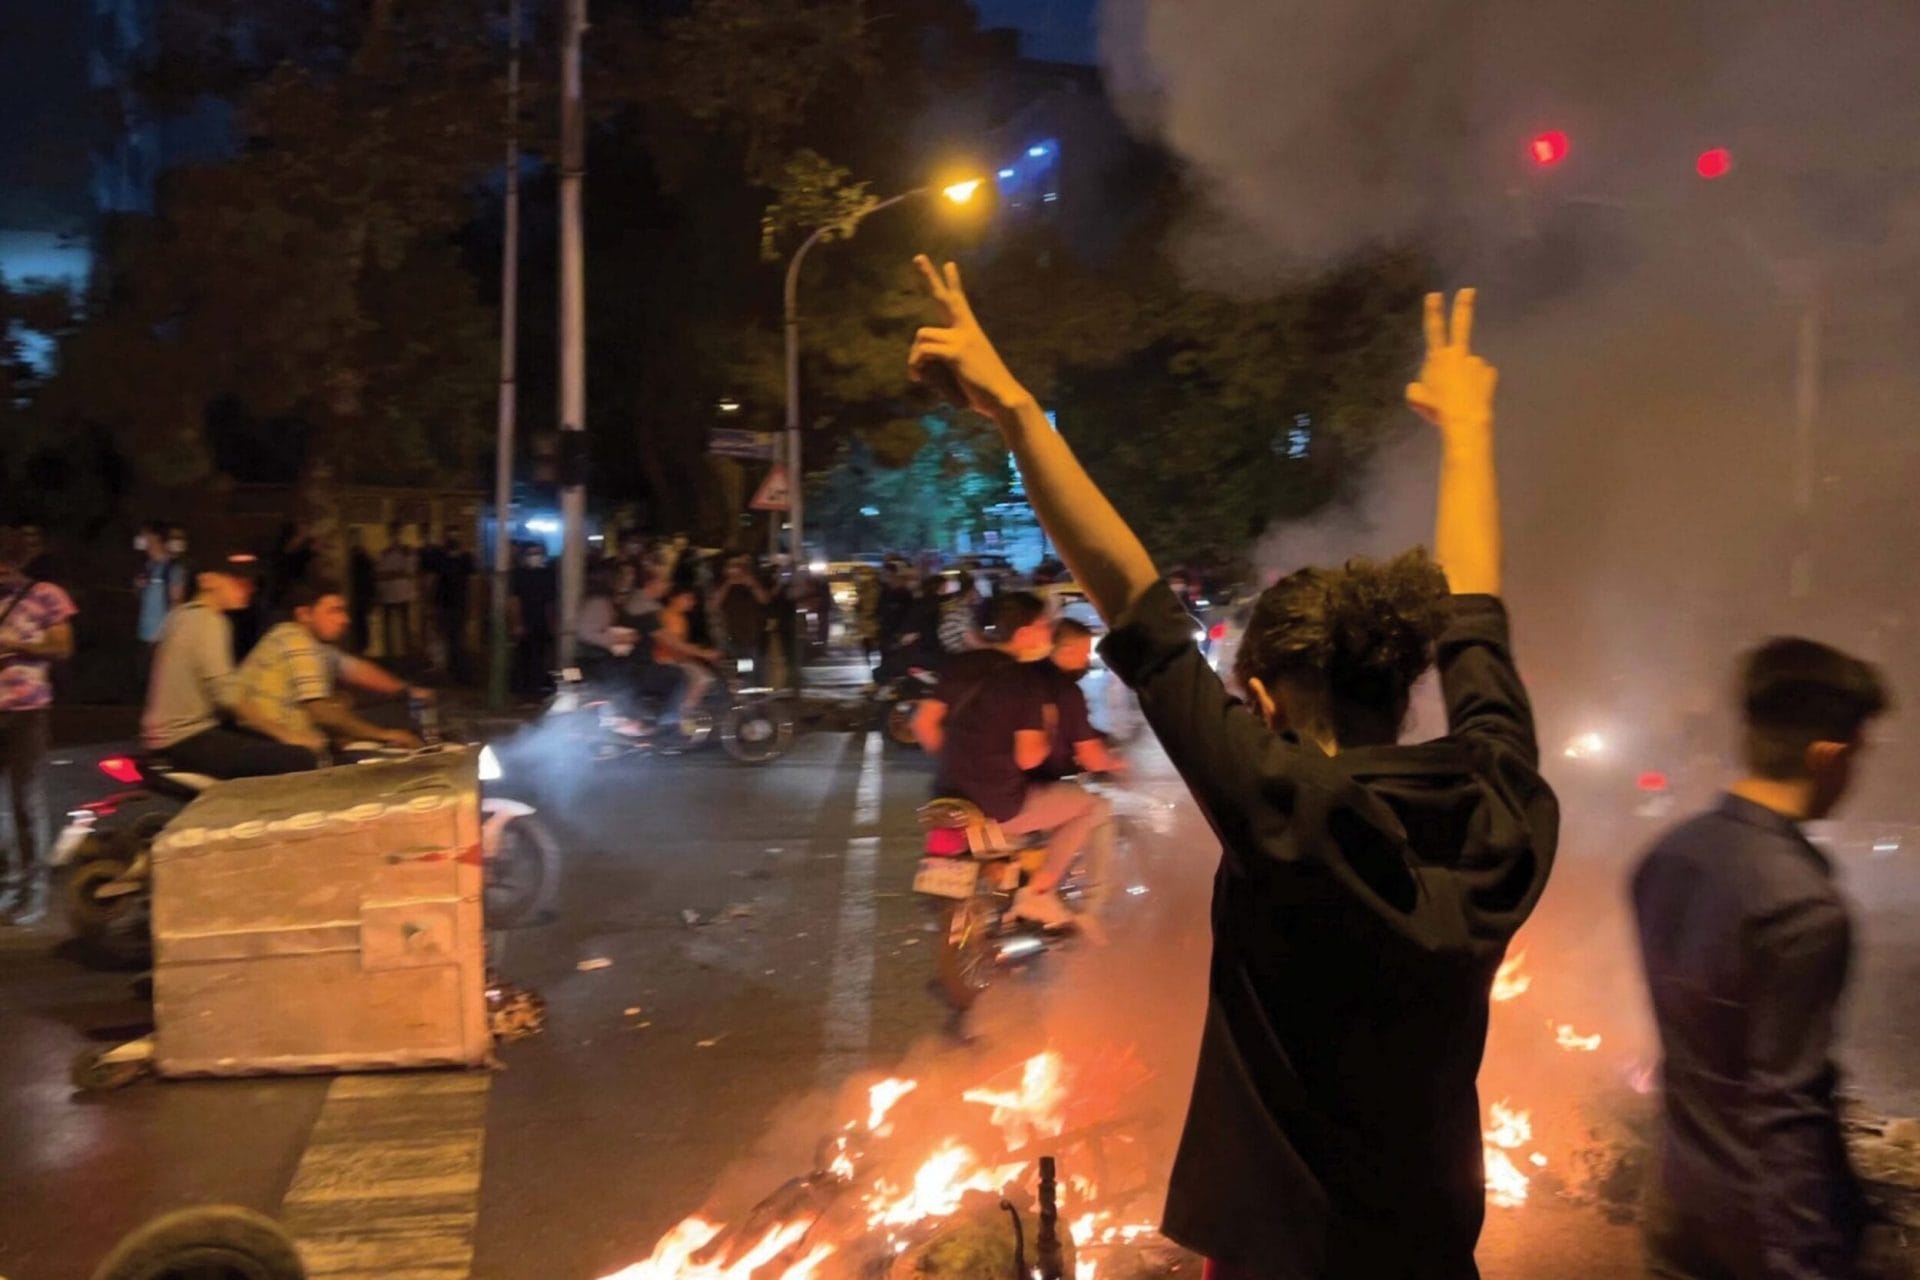 A demonstrator raises his arms and makes the victory sign during a protest for Mahsa Amini in Iran, 19th September 2022